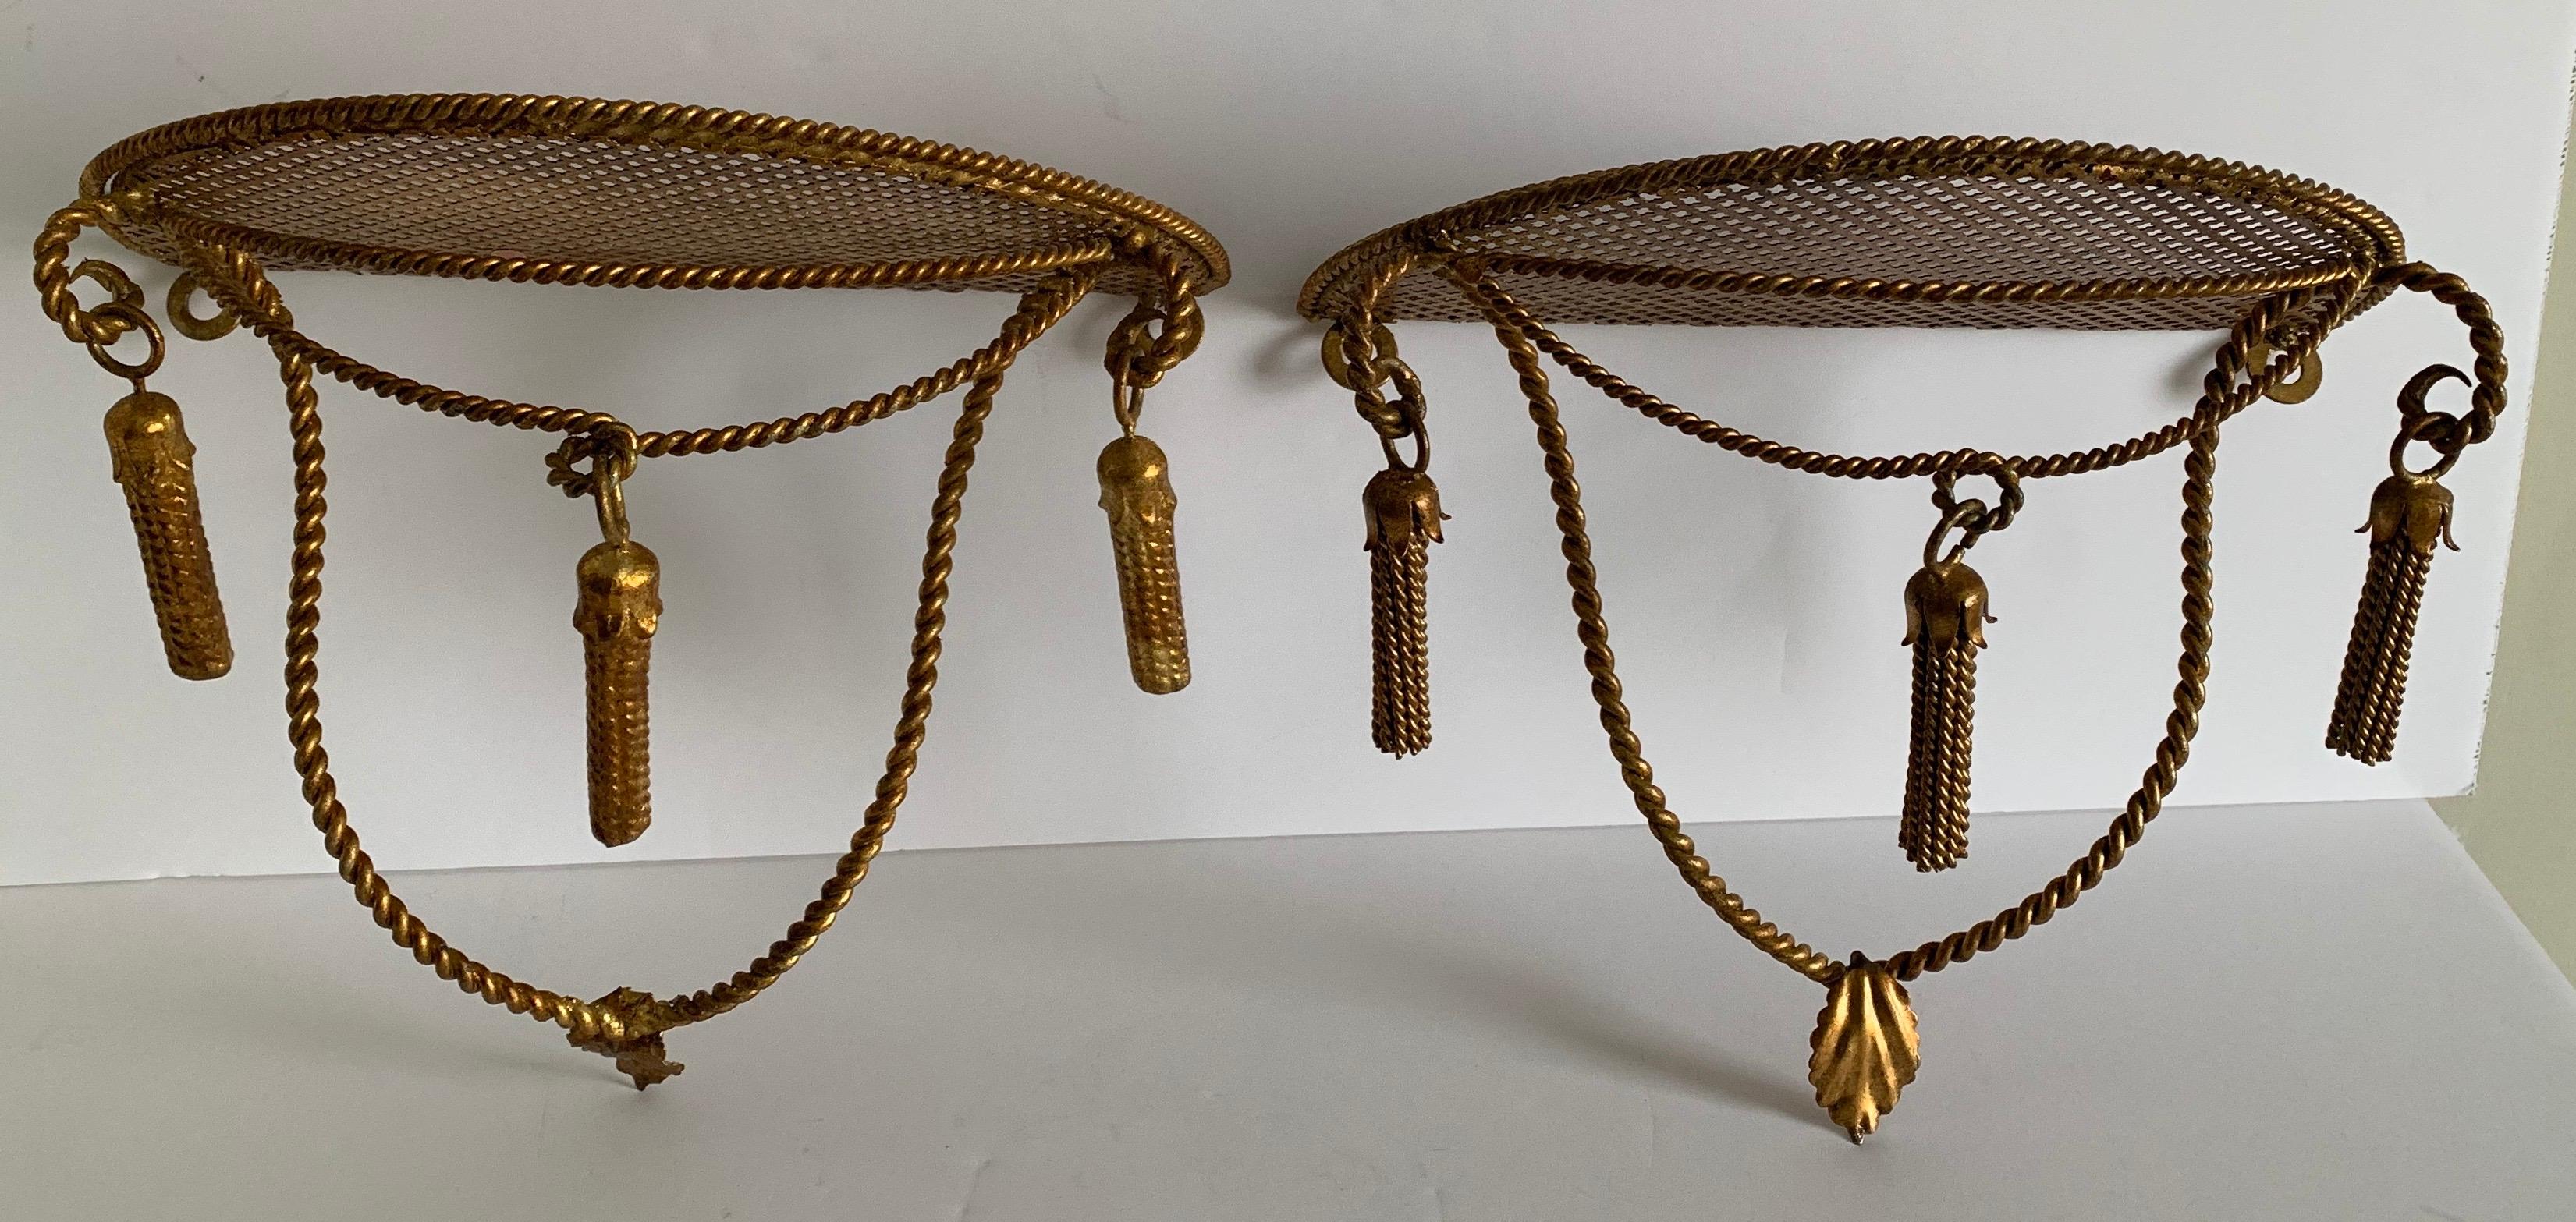 Pair of Italian gilt metal wall brackets. Original gilt metal finish with tassel detailing. One bracket retains 'Made in Italy' sticker on the underside. Hanging hardware is not included.